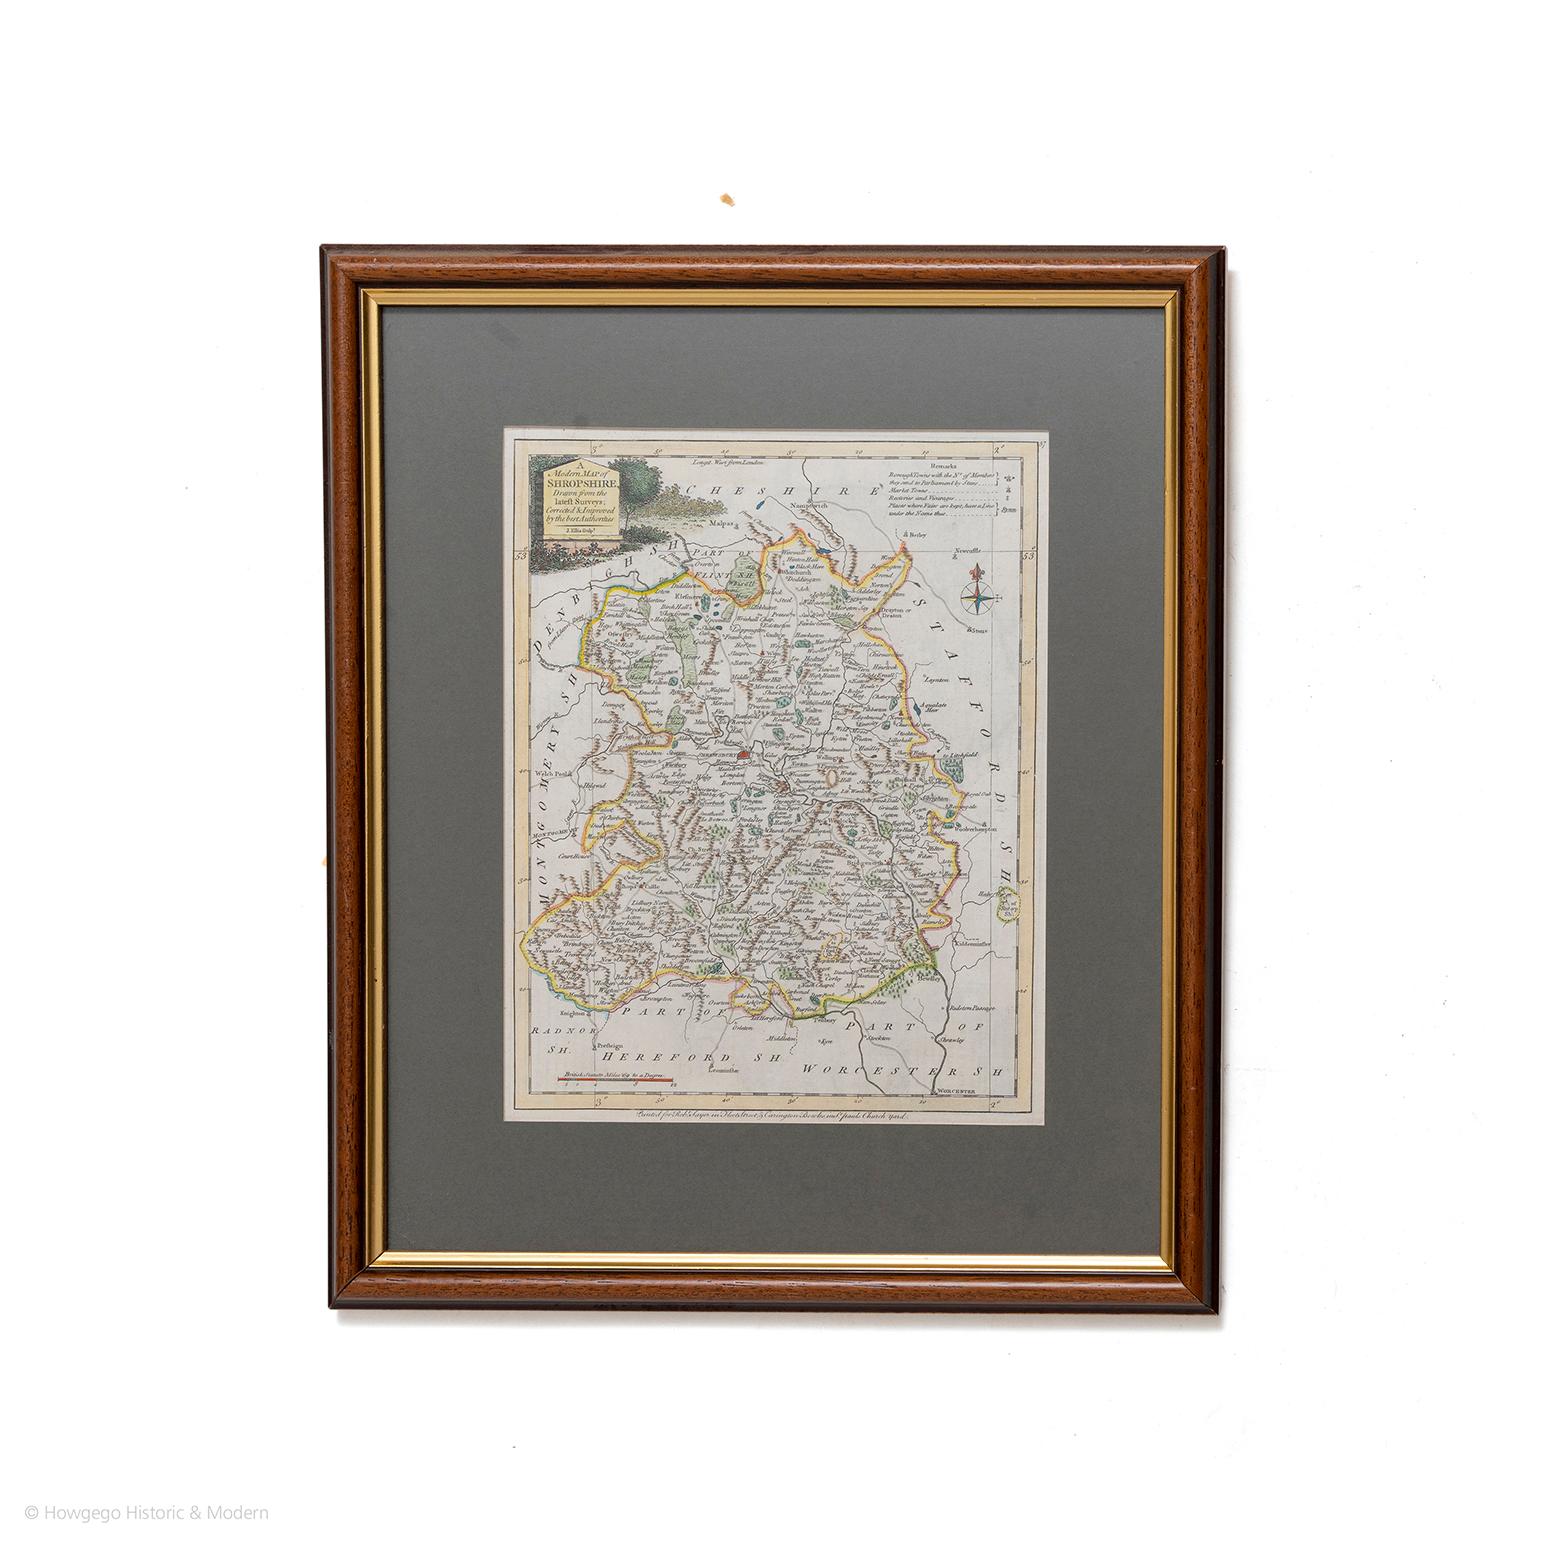 A modern map of Shropshire Drawn from the latest surveys corrected and improved by the best authorities. 
Artist Joseph Ellis sculptor.
Joseph Ellis was an engraver and publisher from Clerkenwell in London and was apprenticed to Richard William